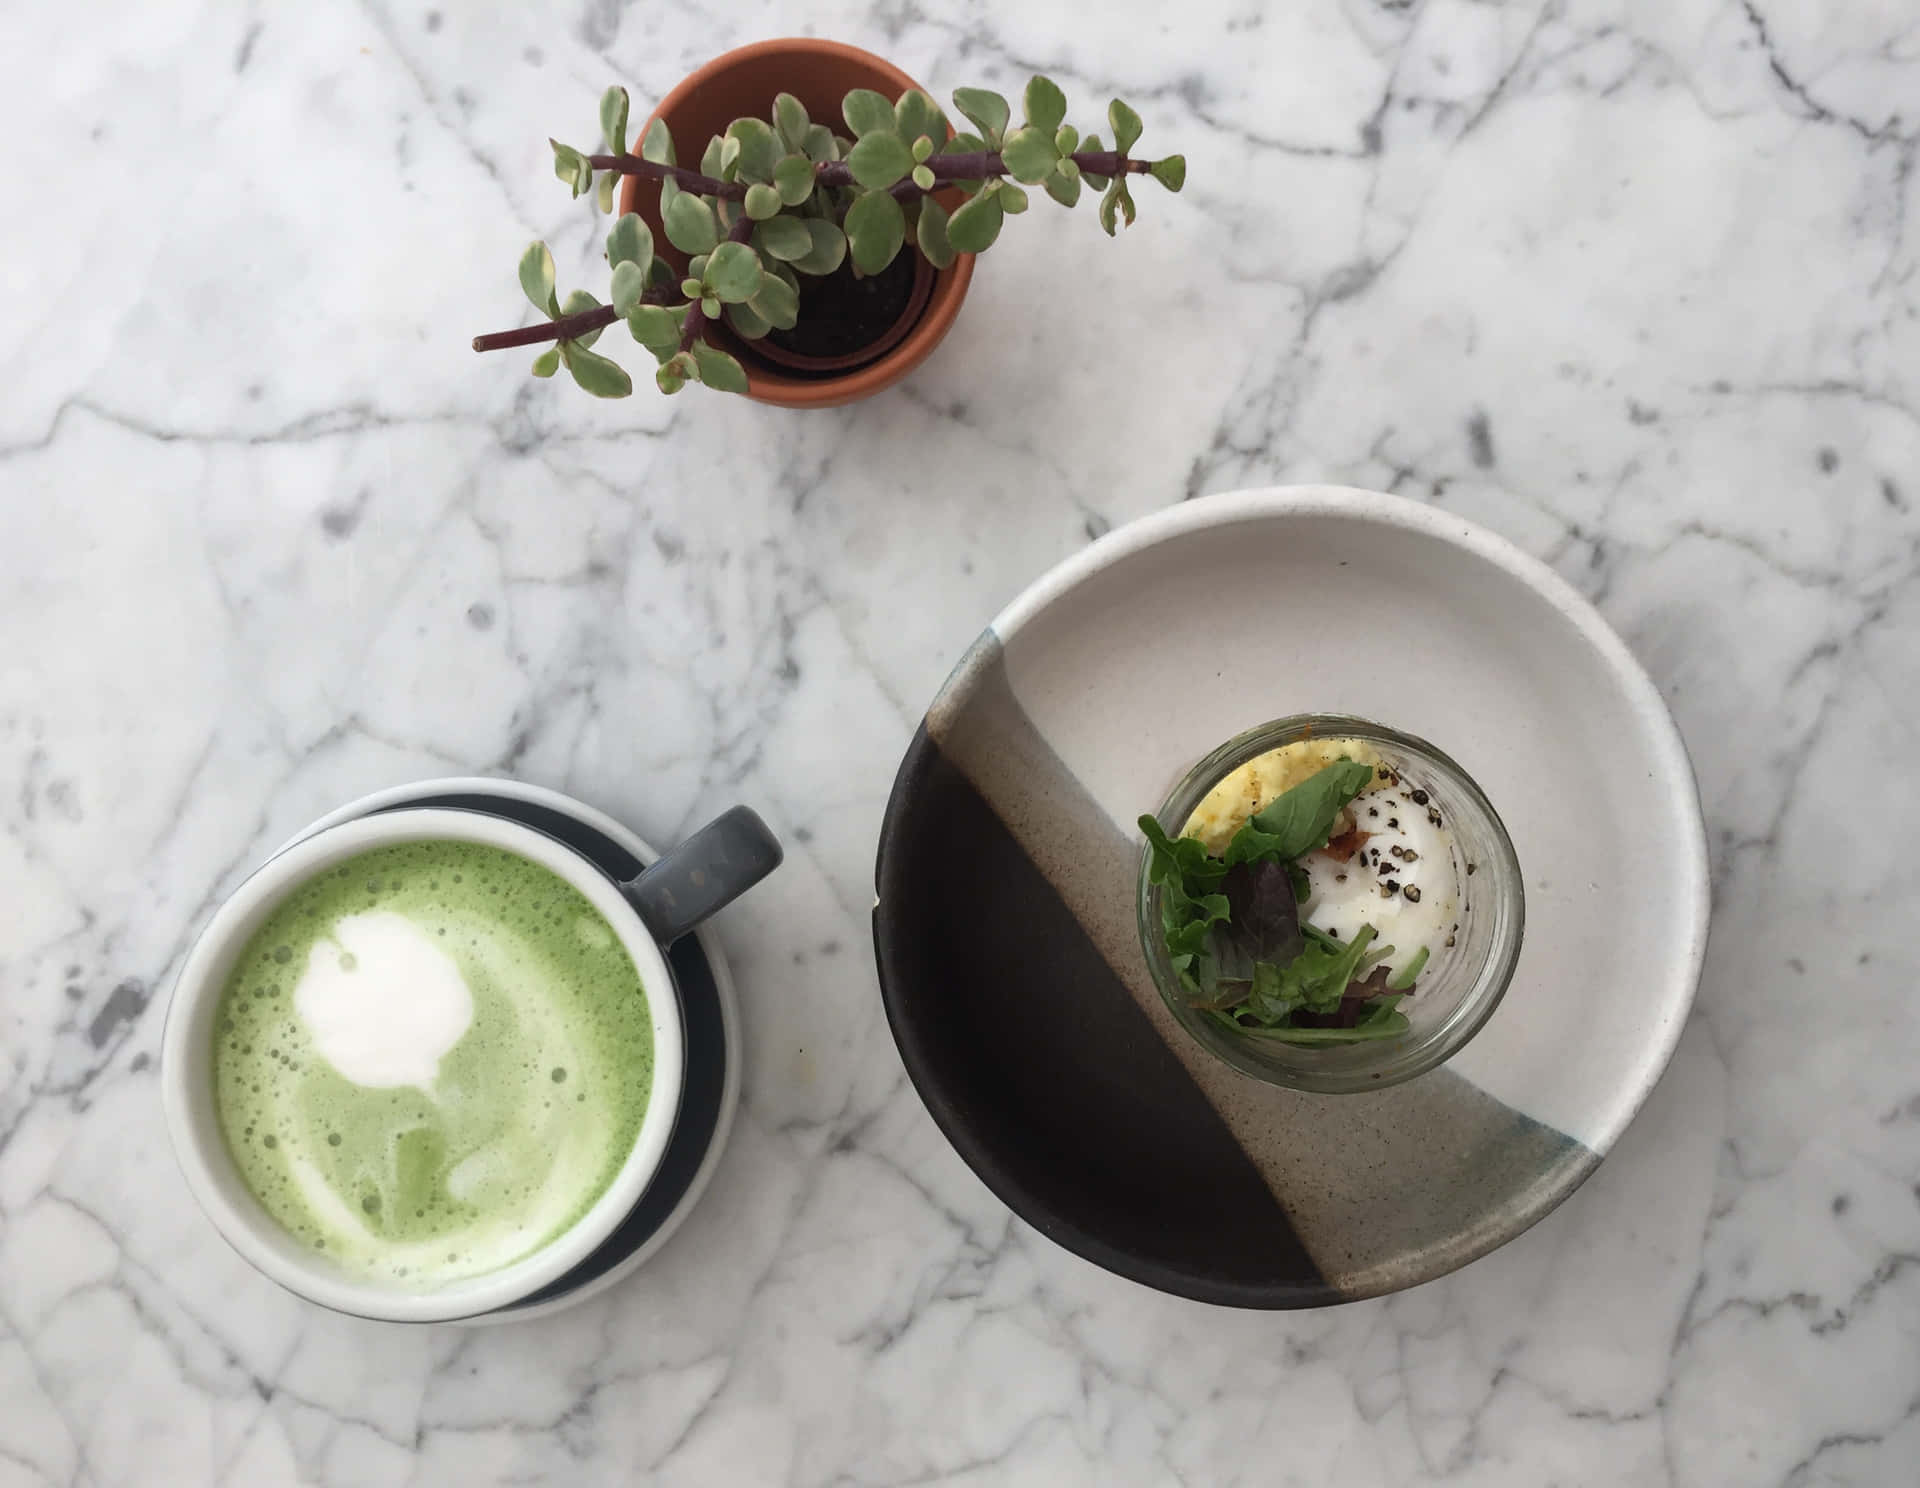 Matcha Latteand Healthy Snack Top View Wallpaper